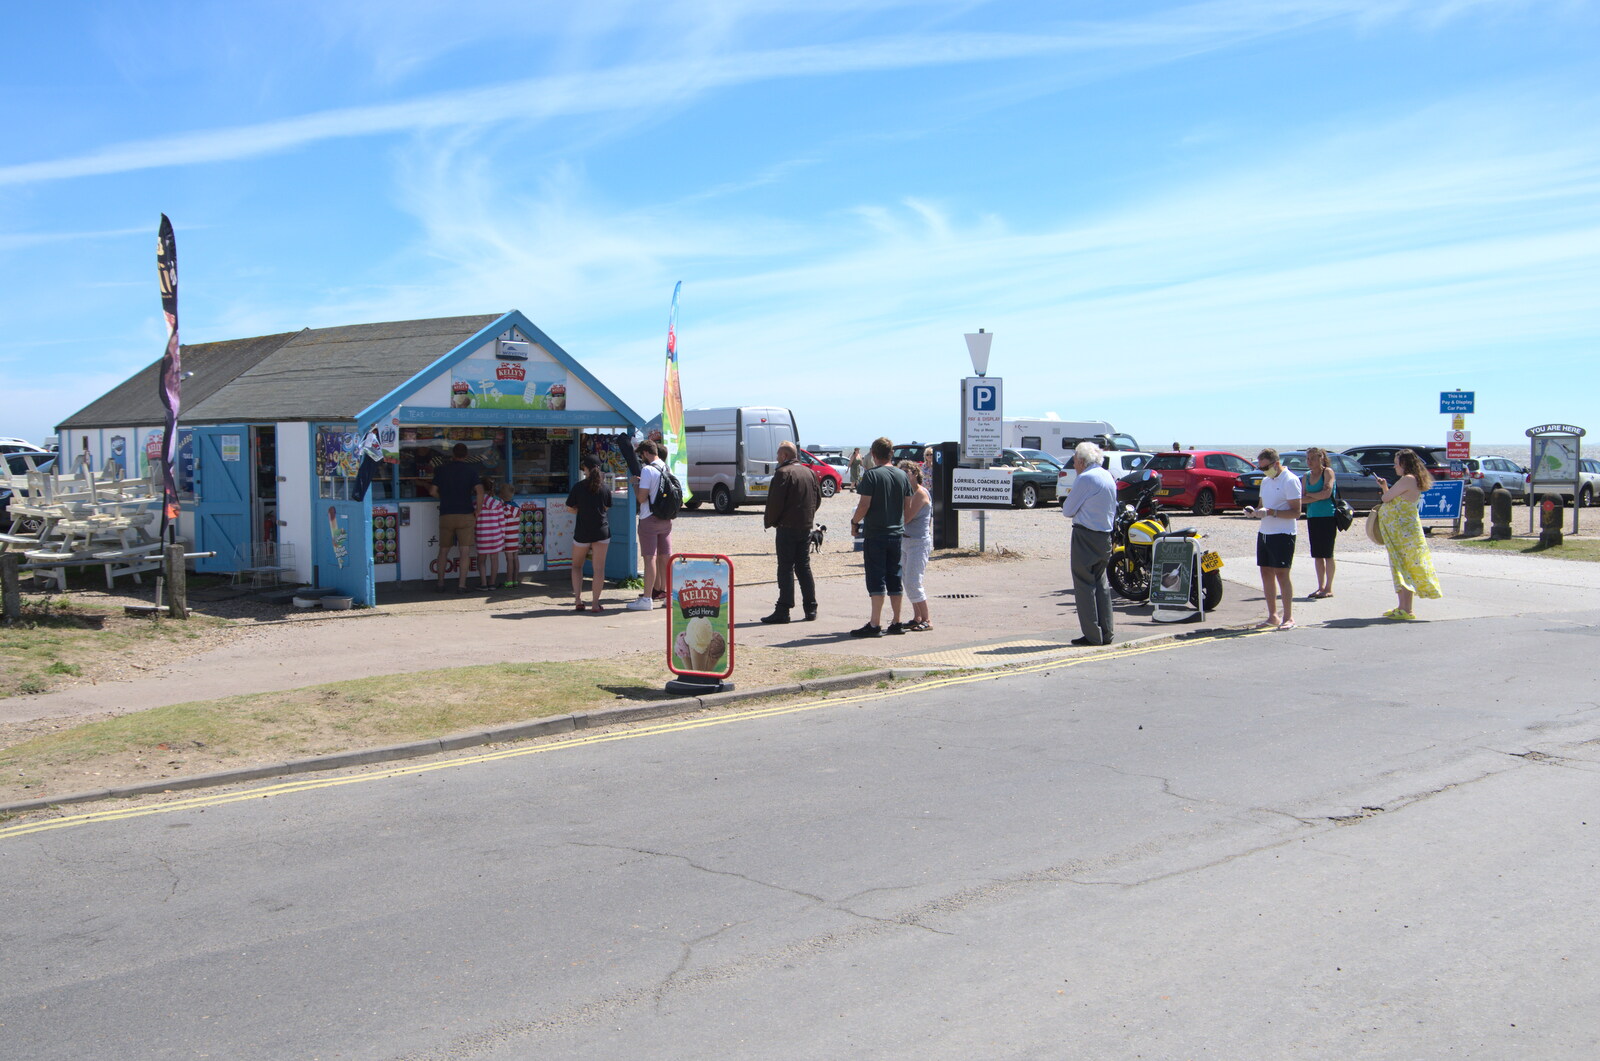 The queues for the ice-cream shop from A Return to Southwold, Suffolk - 14th June 2020